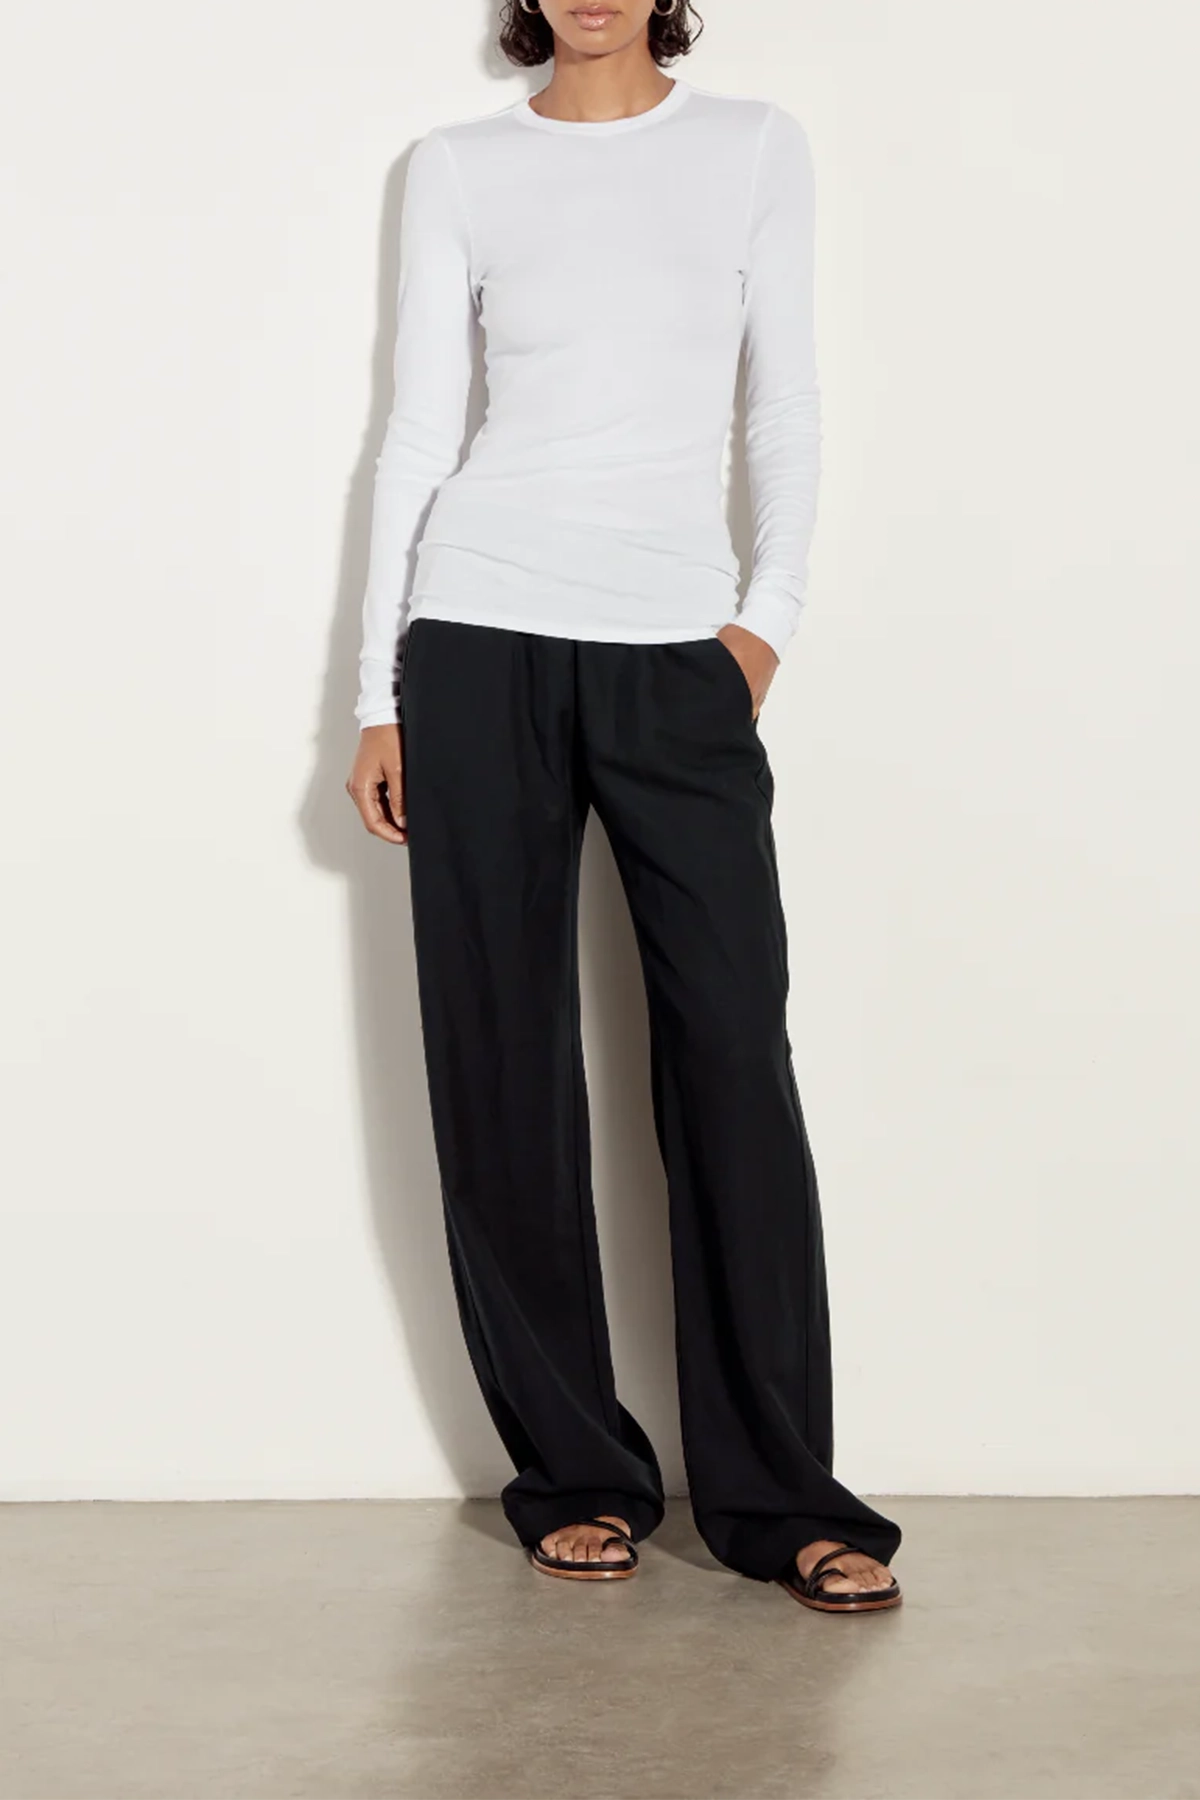 Enza Costa Twill Everywhere Pant